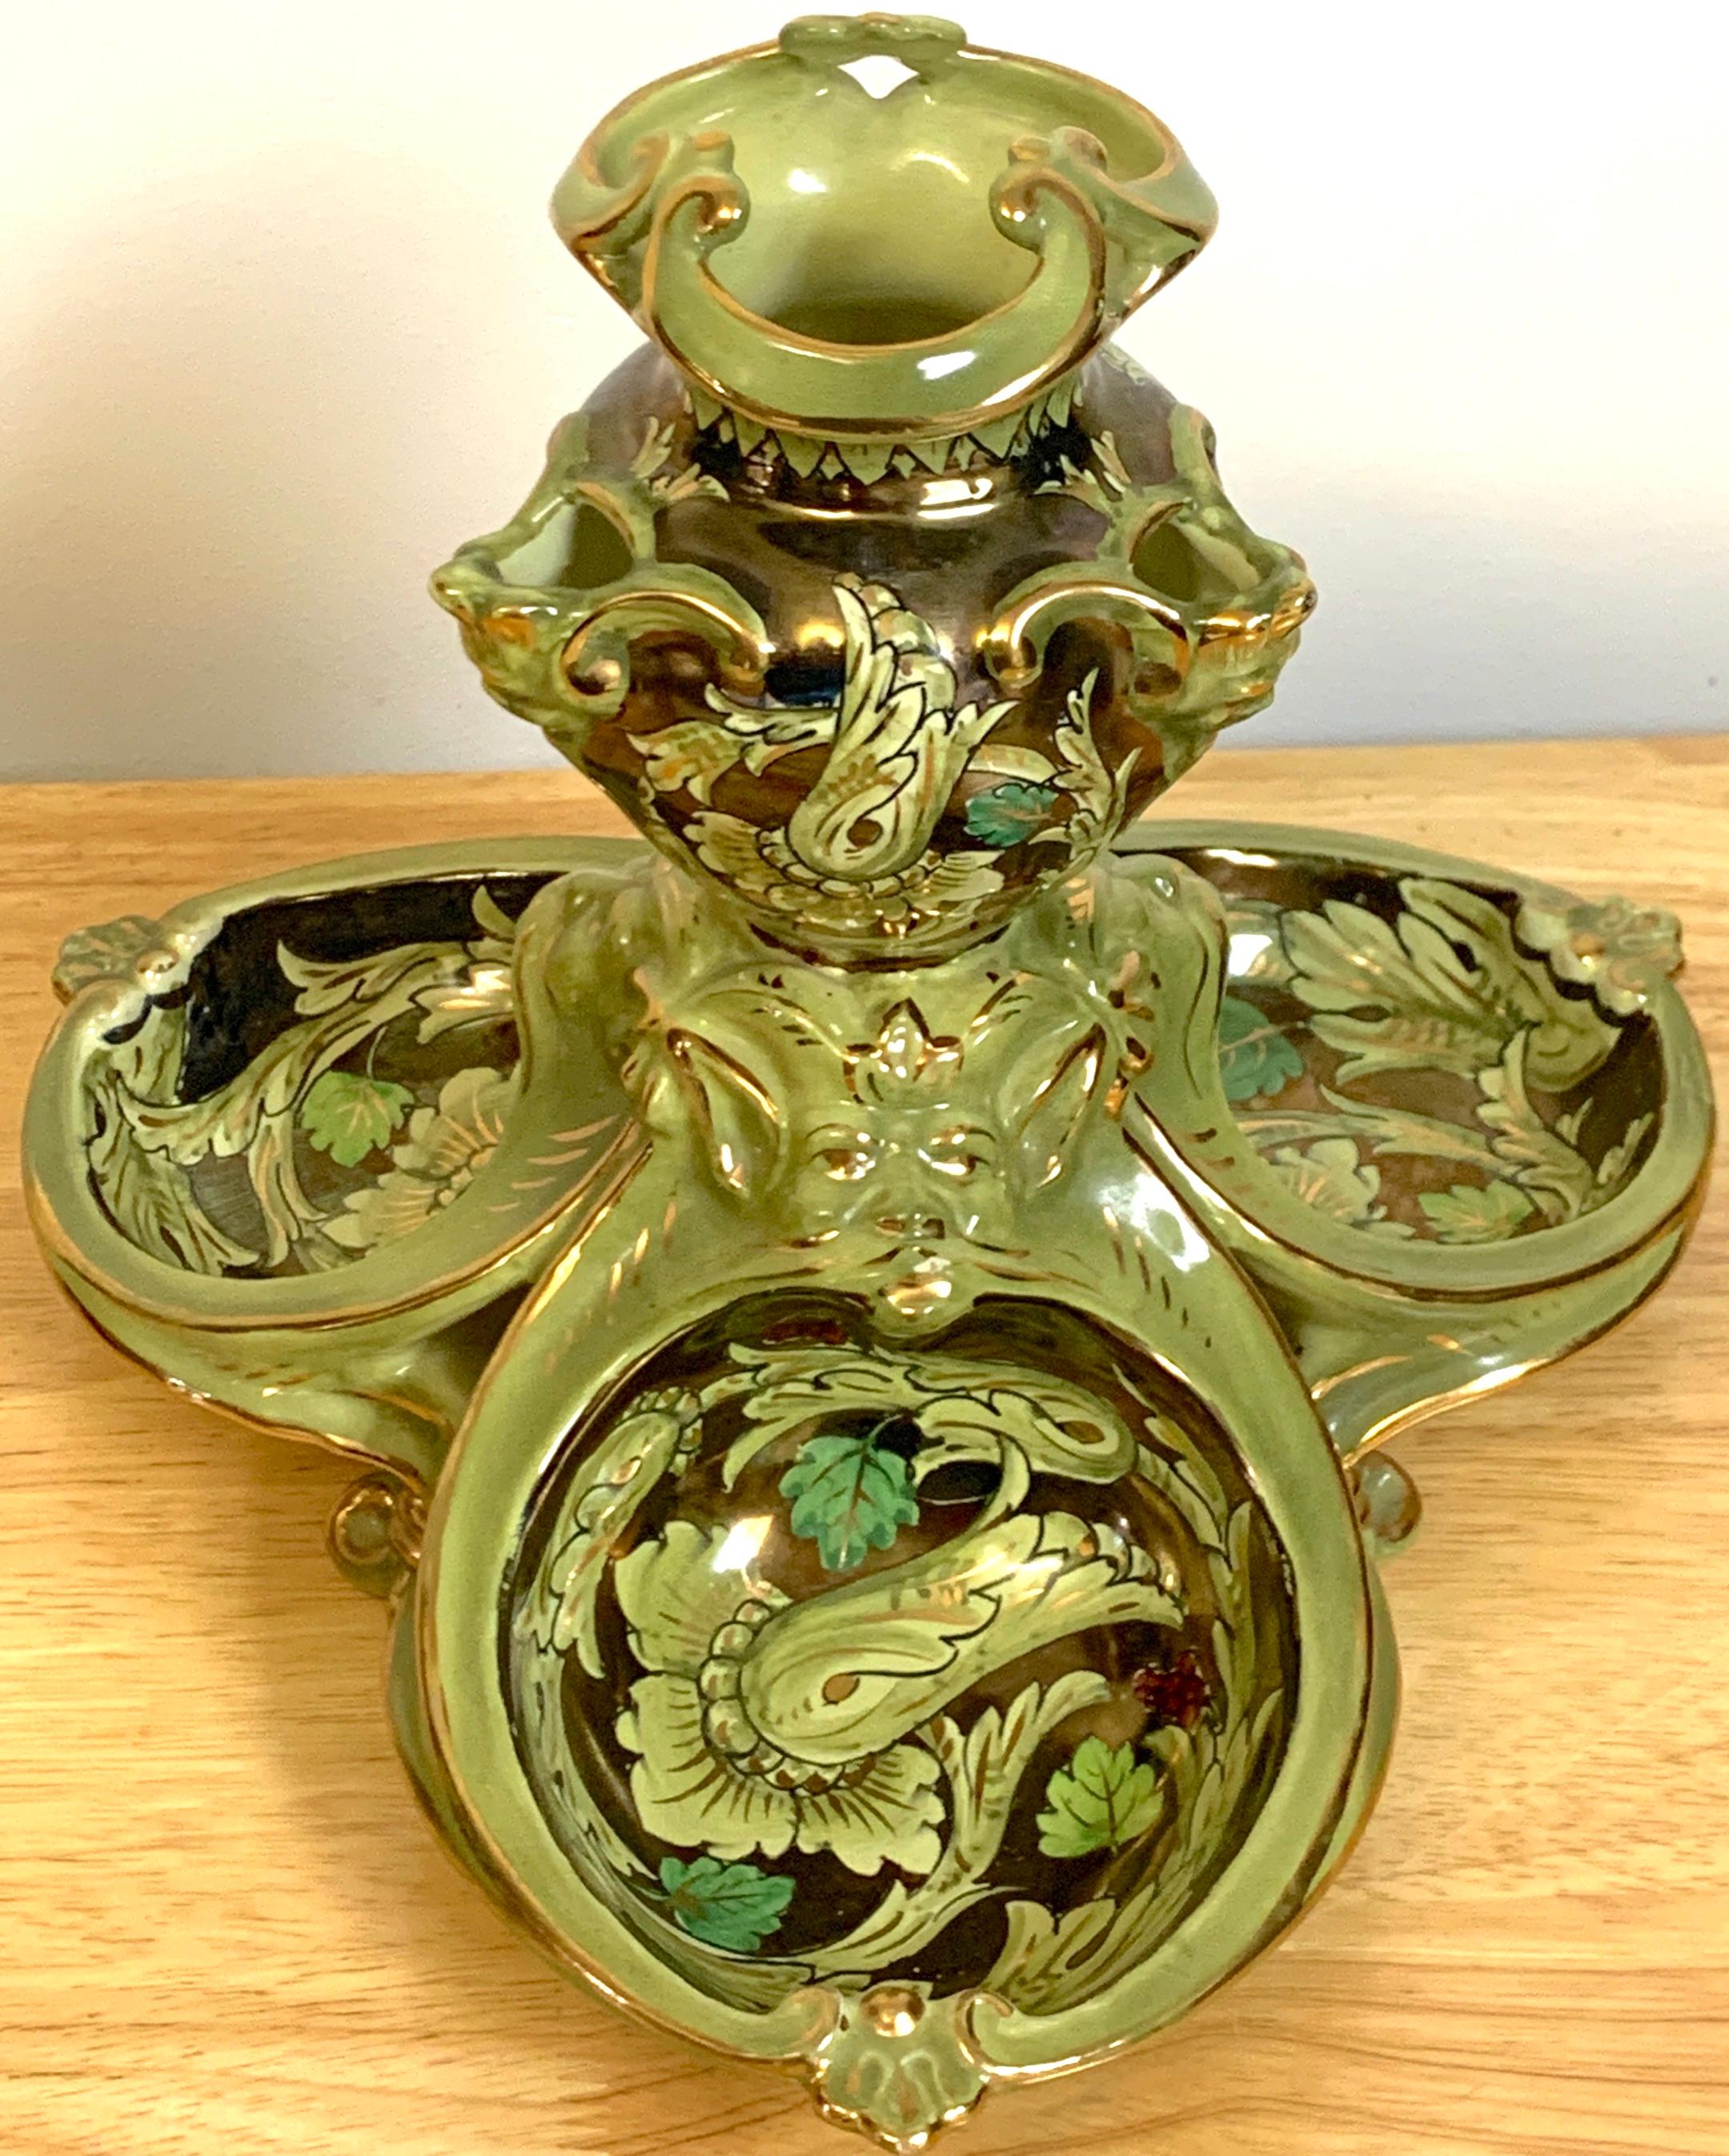 Cantagalli Lusture Majolica Centerpiece In Good Condition For Sale In West Palm Beach, FL